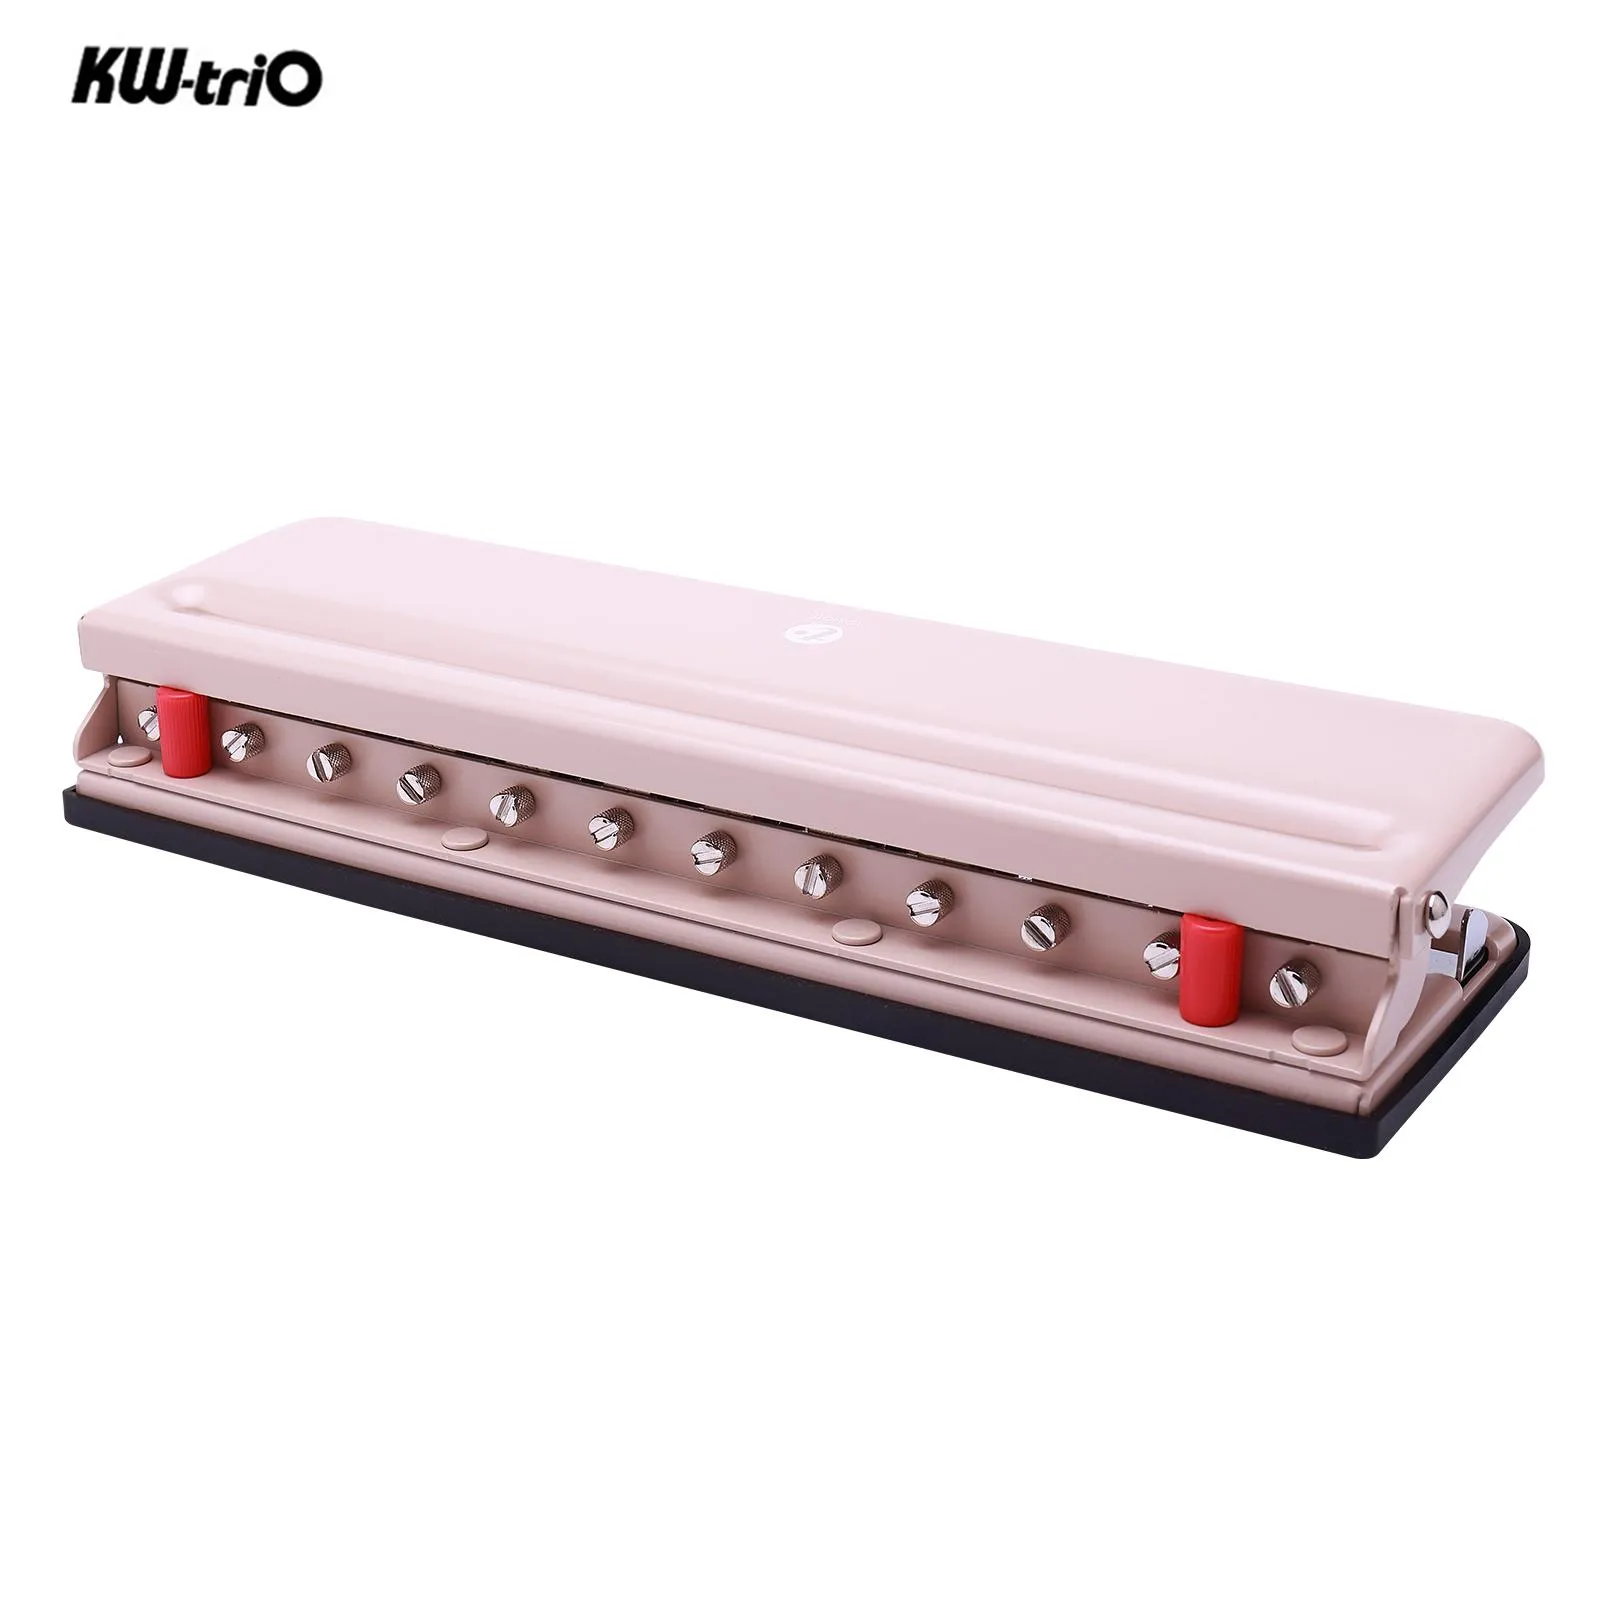 Punch KWtriO Handheld DIY Mushroom 12 Holes Punch Puncher Paper Cutter with Ruler 6 Sheets Punch Capacity A4 / A5 / A7 / B5